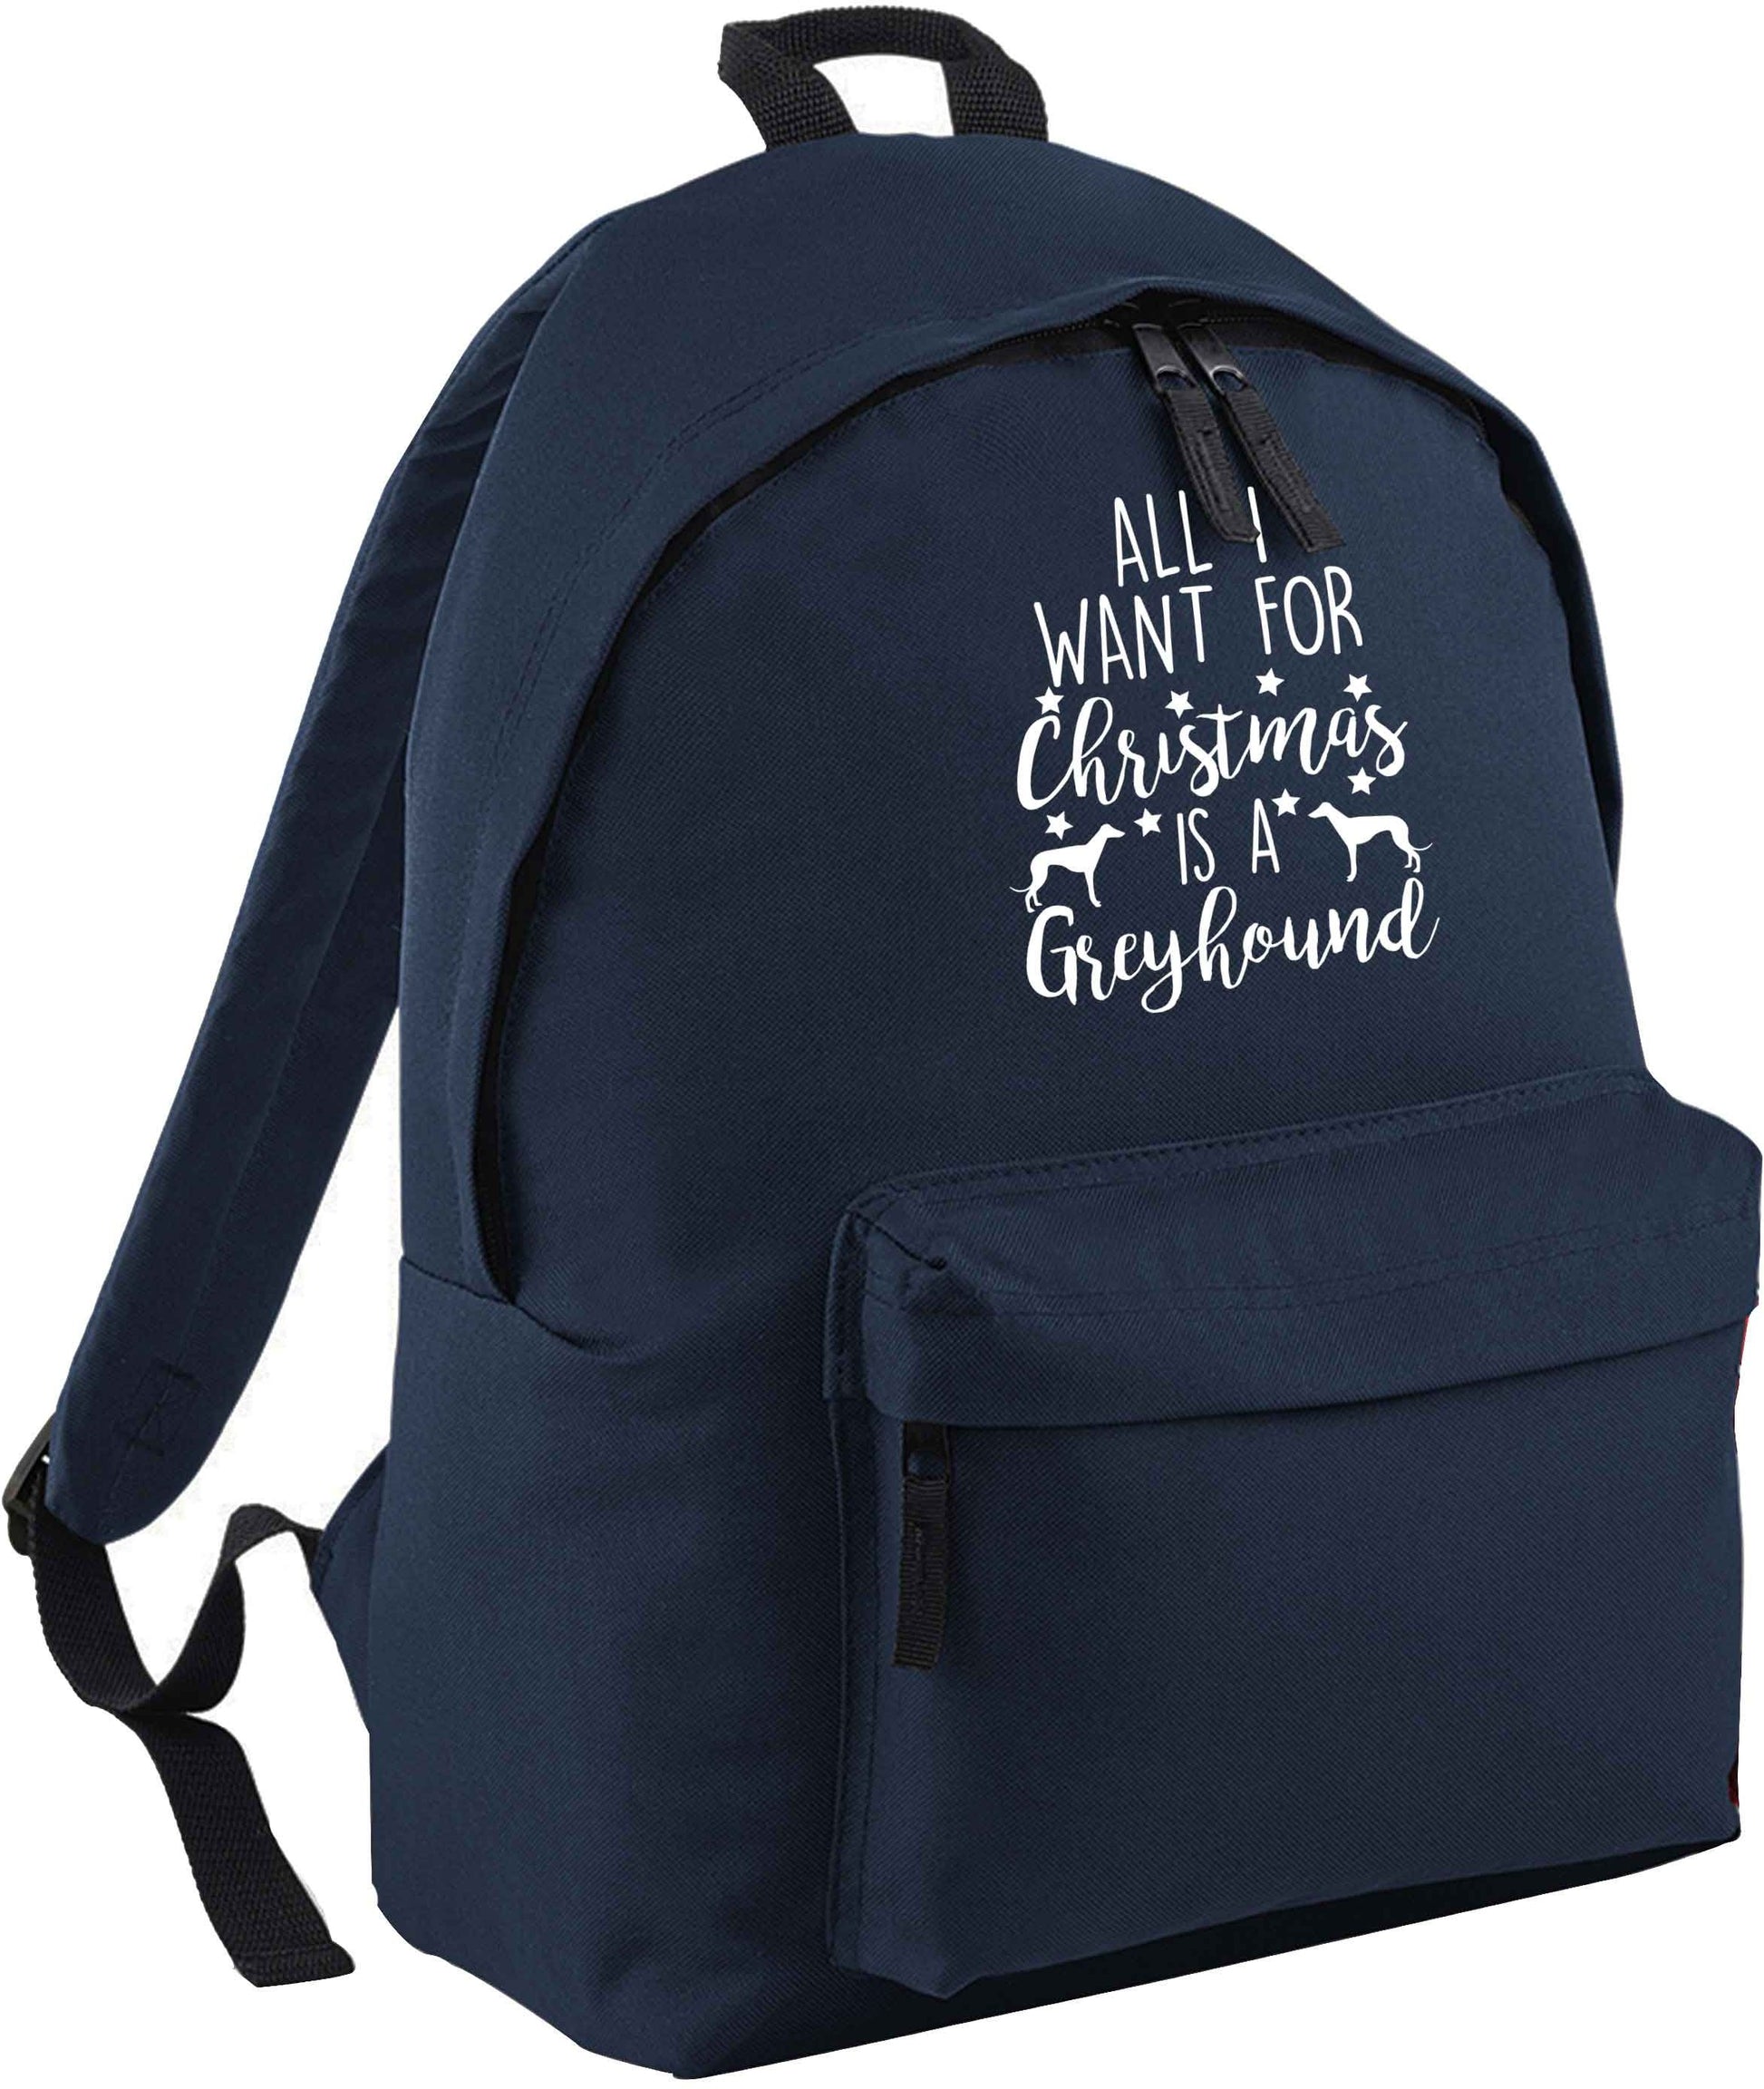 All I want for Christmas is a greyhound | Children's backpack